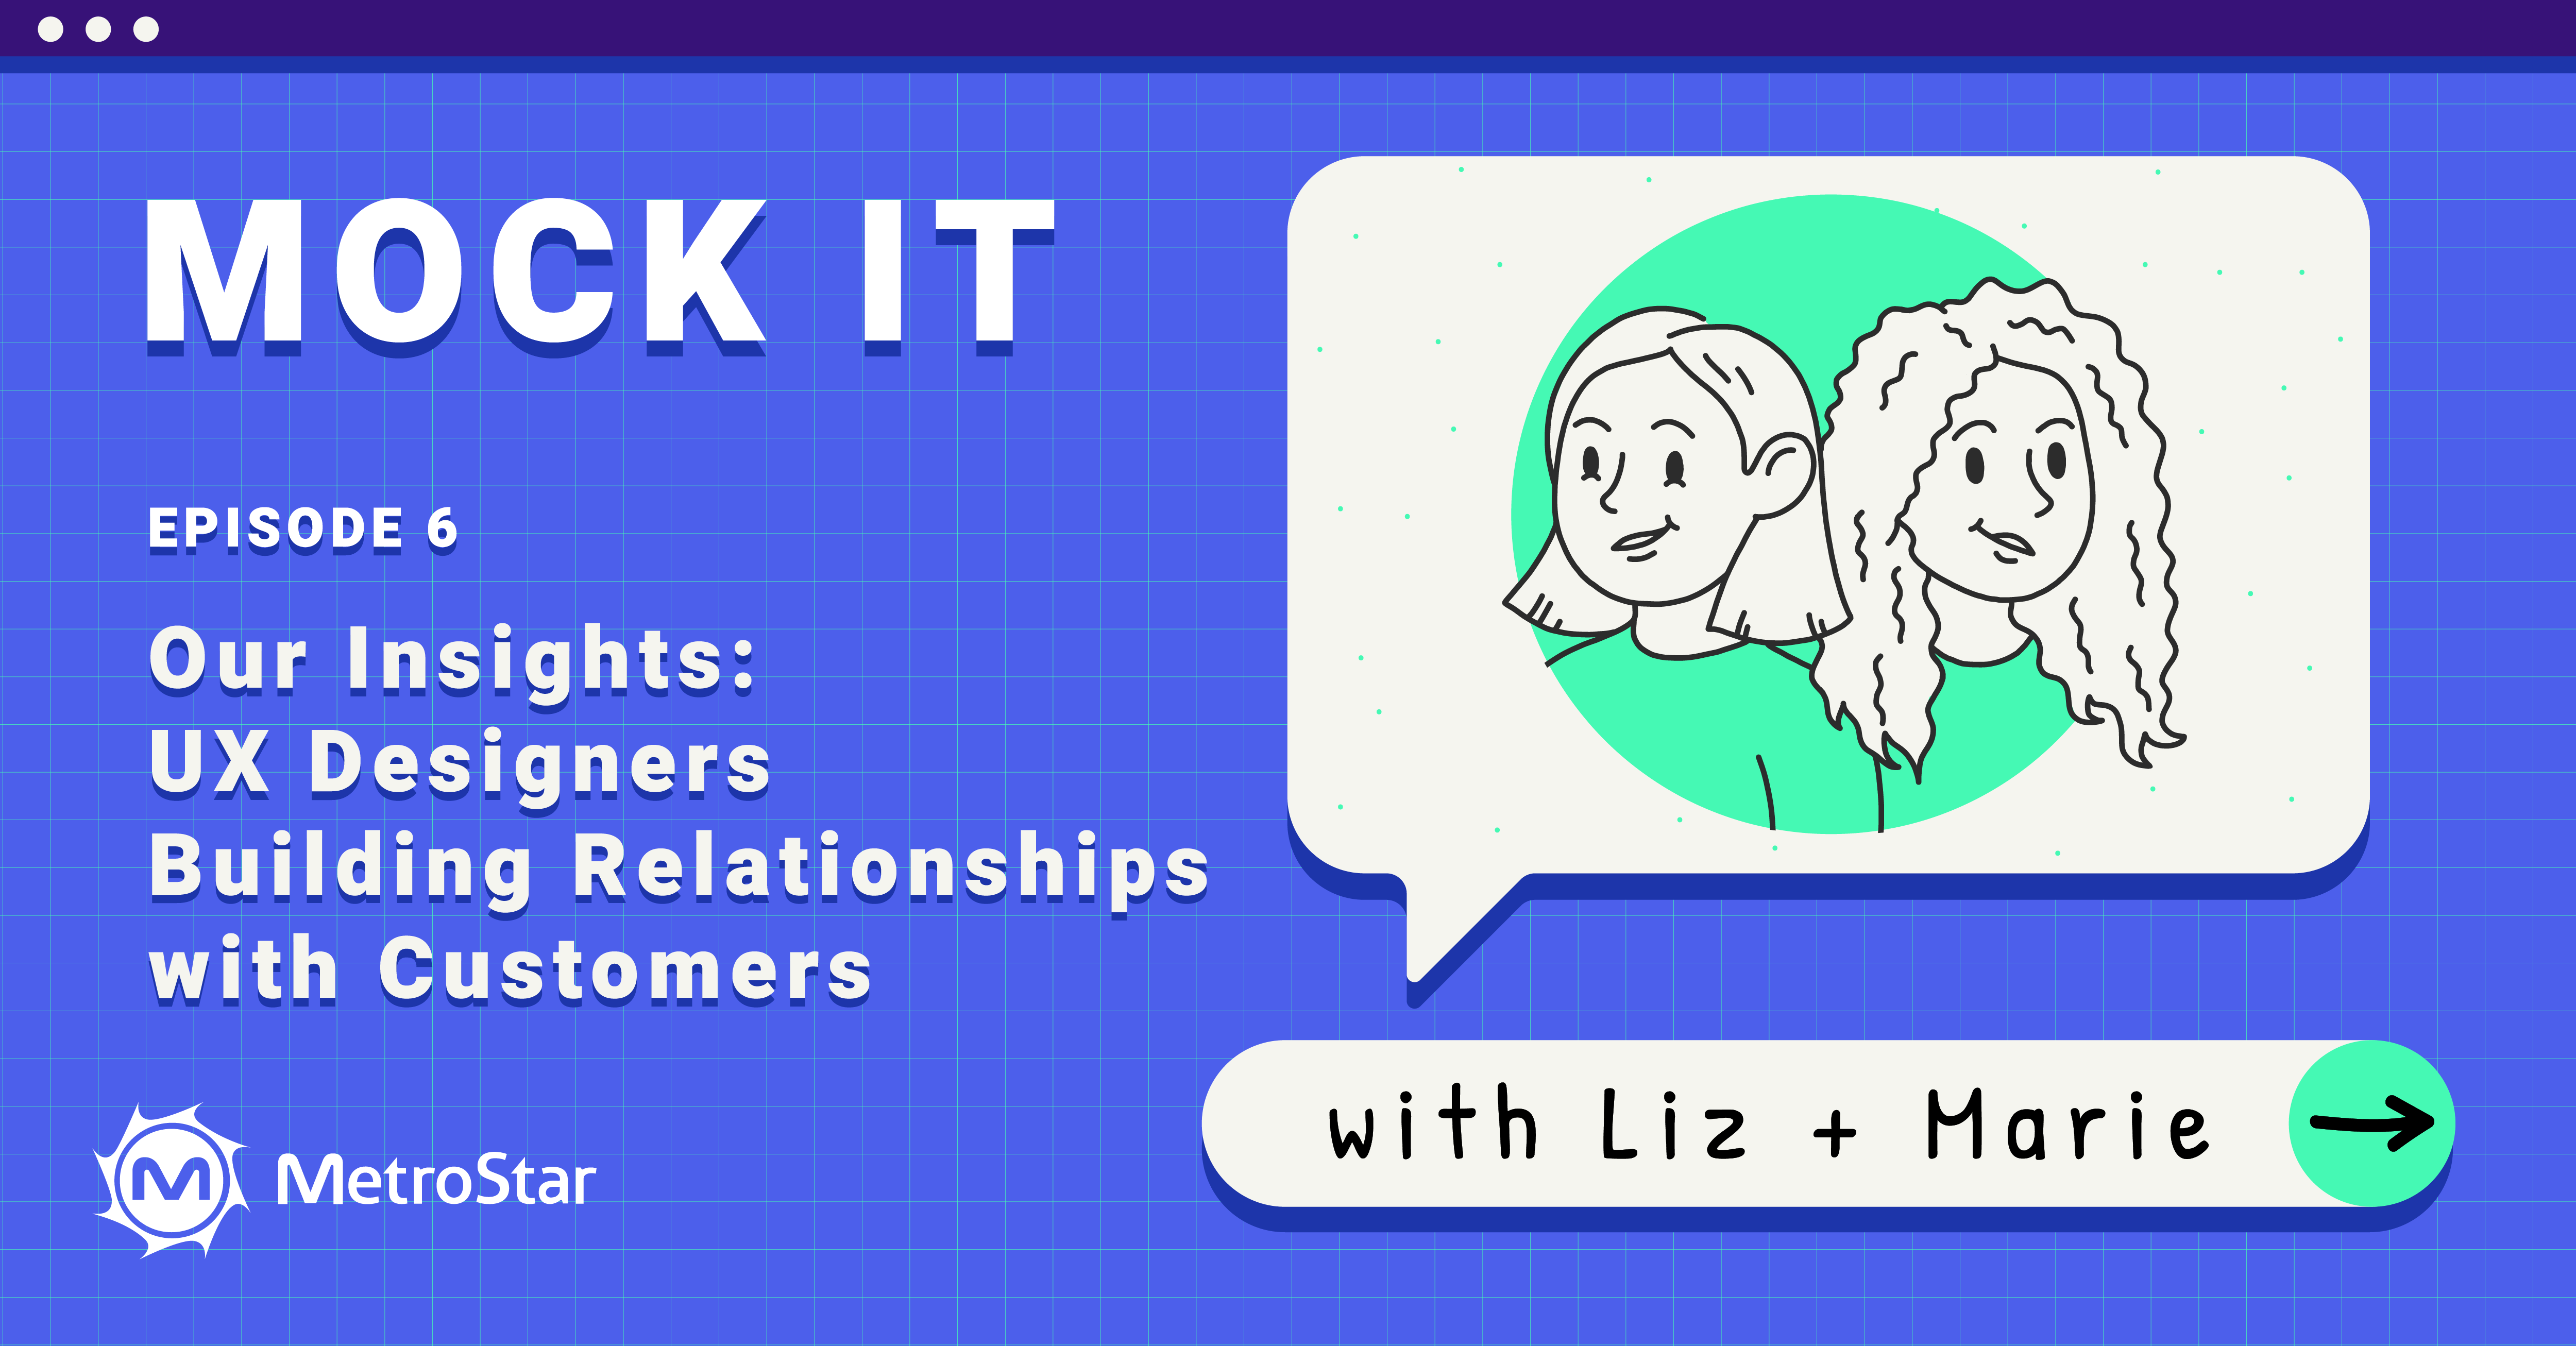 Mock IT Episode 6 title with podcast logo illustrating Liz and Marie 